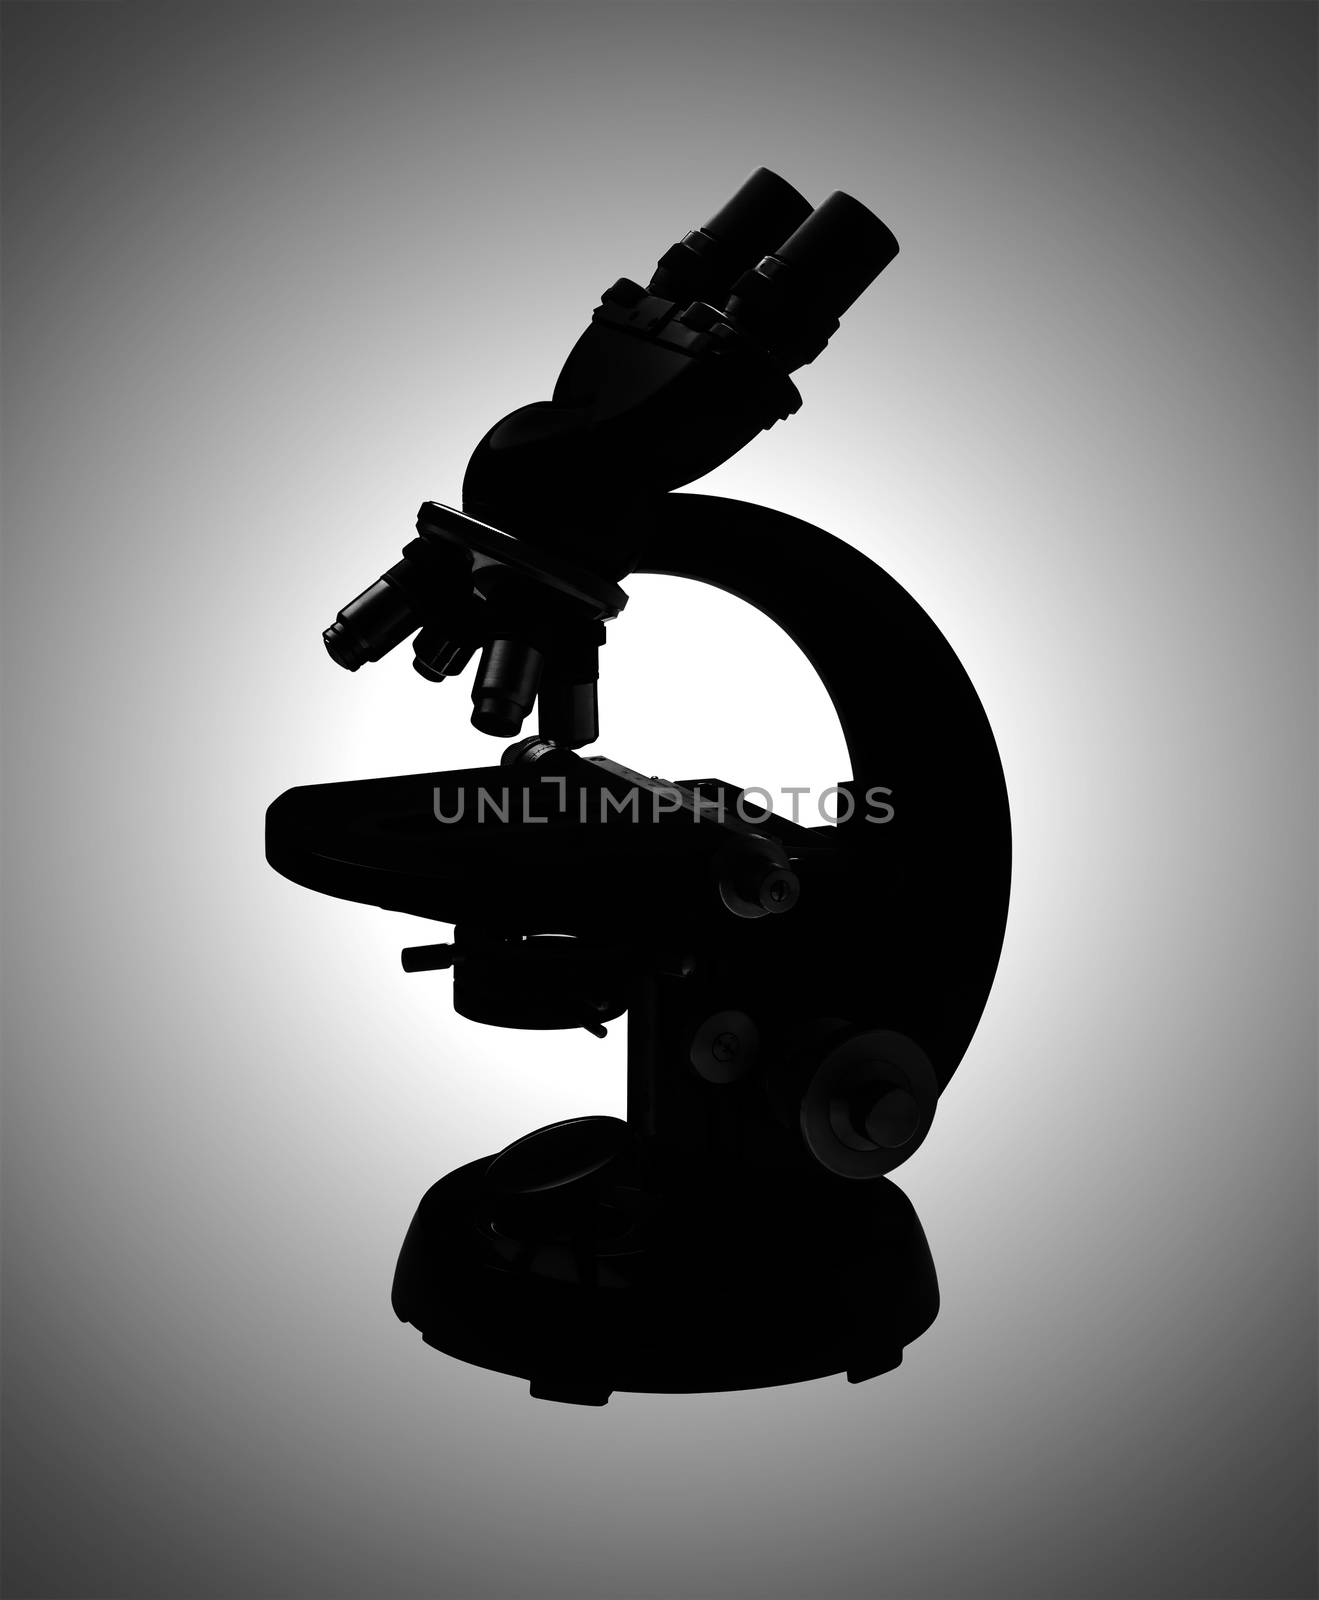 Microscope in silhouette on a graduated white to gray background, isolated